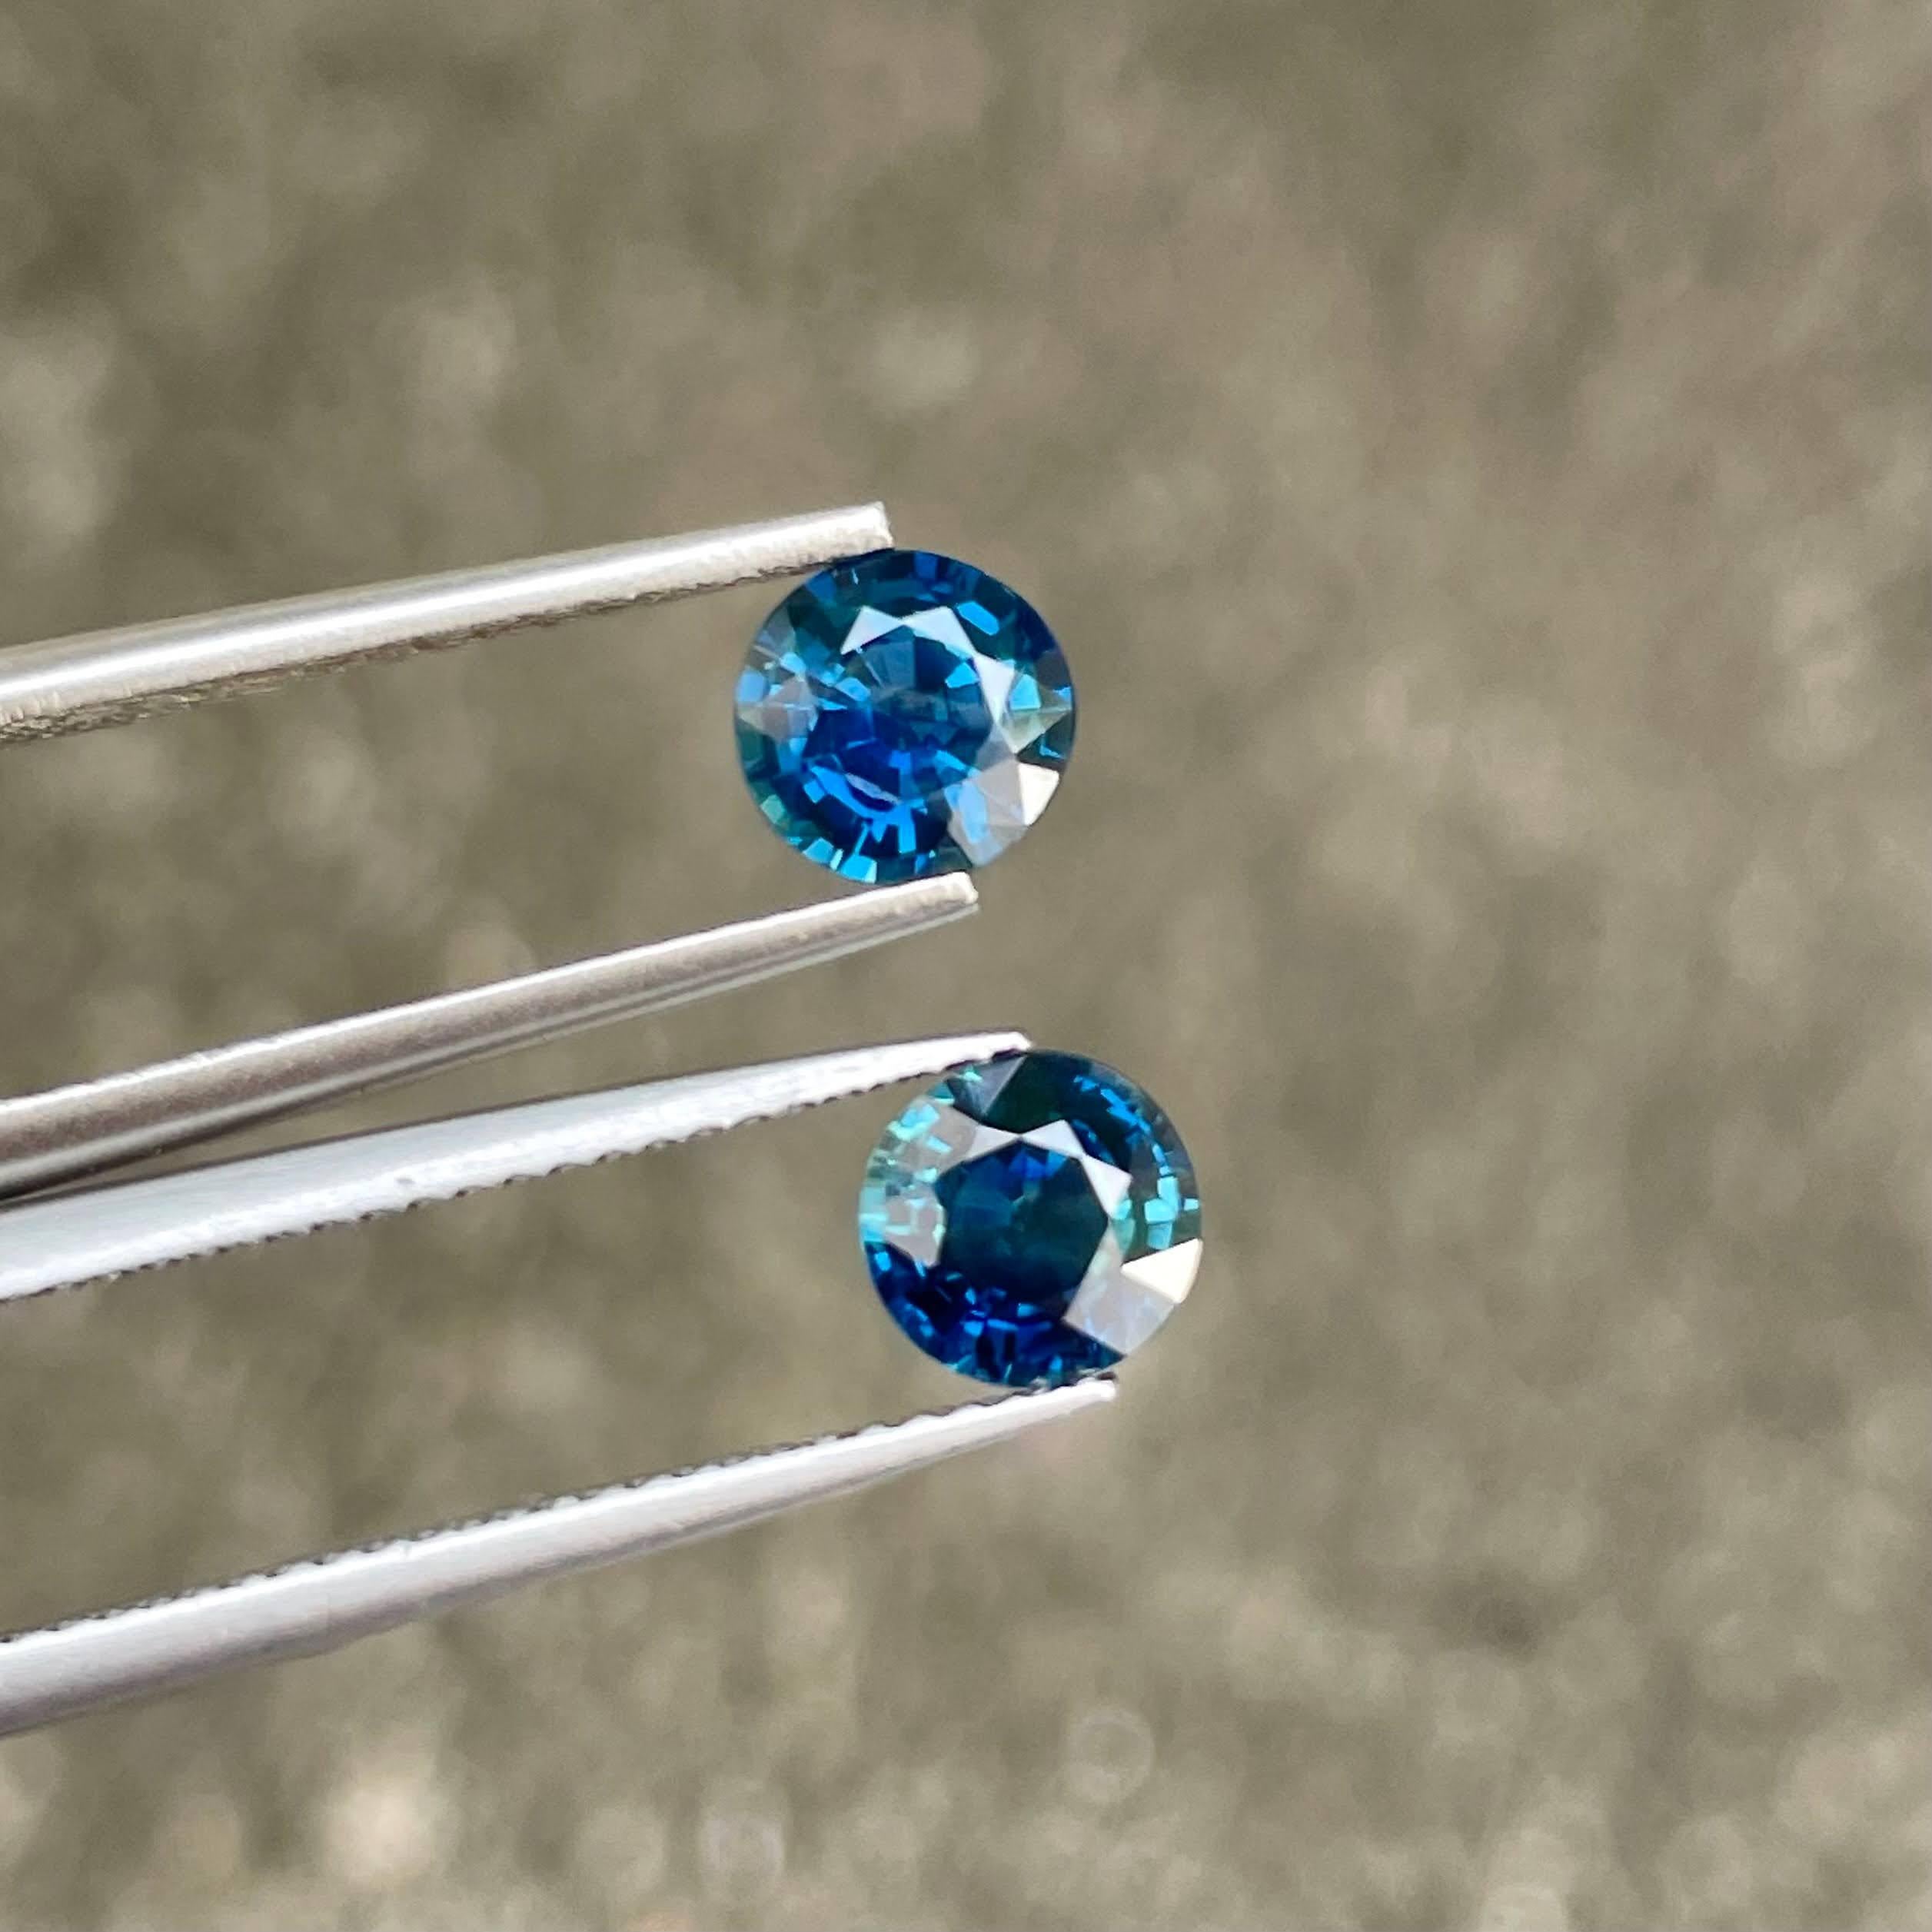 Weight 2.24 carats 
Dimensions 6.3x3.5 mm
Treatment Heated 
Origin Madagascar 
Clarity VVS/Better 
Shape round 
Cut round brilliant 





Behold the mesmerizing beauty of a 2.24-carat pair of Teal Blue Sapphires, impeccably crafted in a Round Cut to